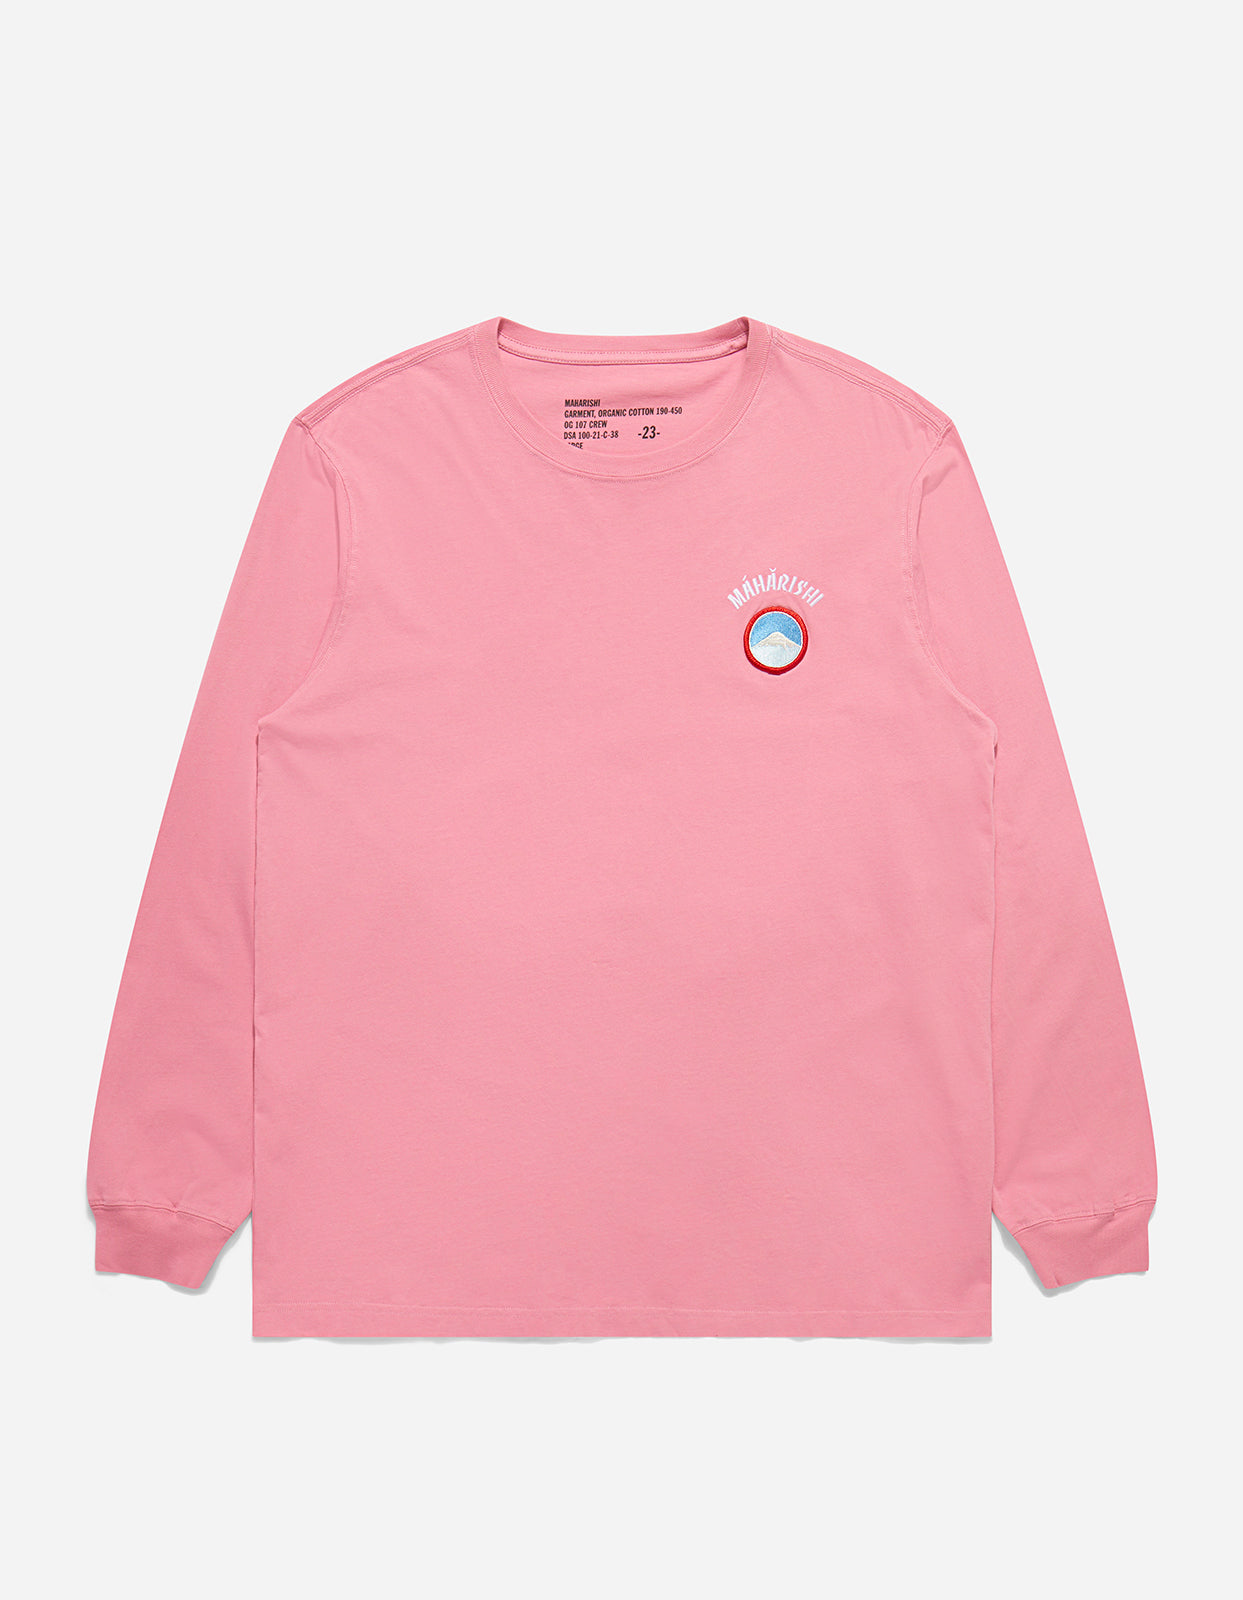 9858 Mahapatchco. Embroidered L/S T-Shirt Magenta